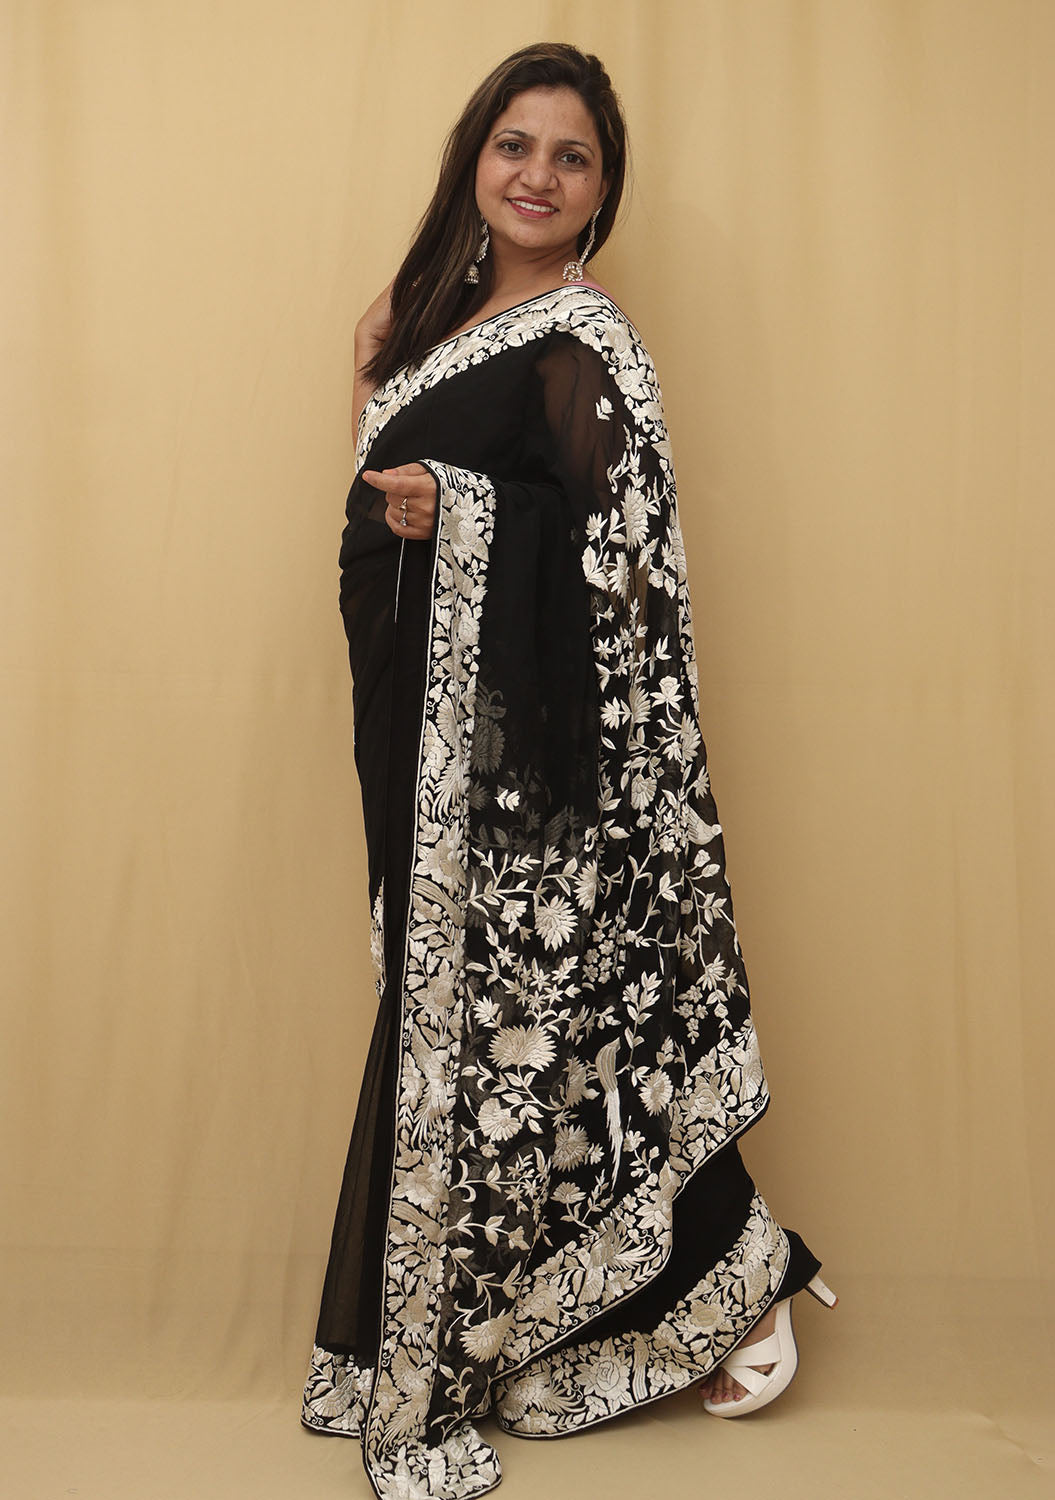 Exquisite Black Hand Embroidered Parsi Gara Saree with Pure Georgette and Floral Design